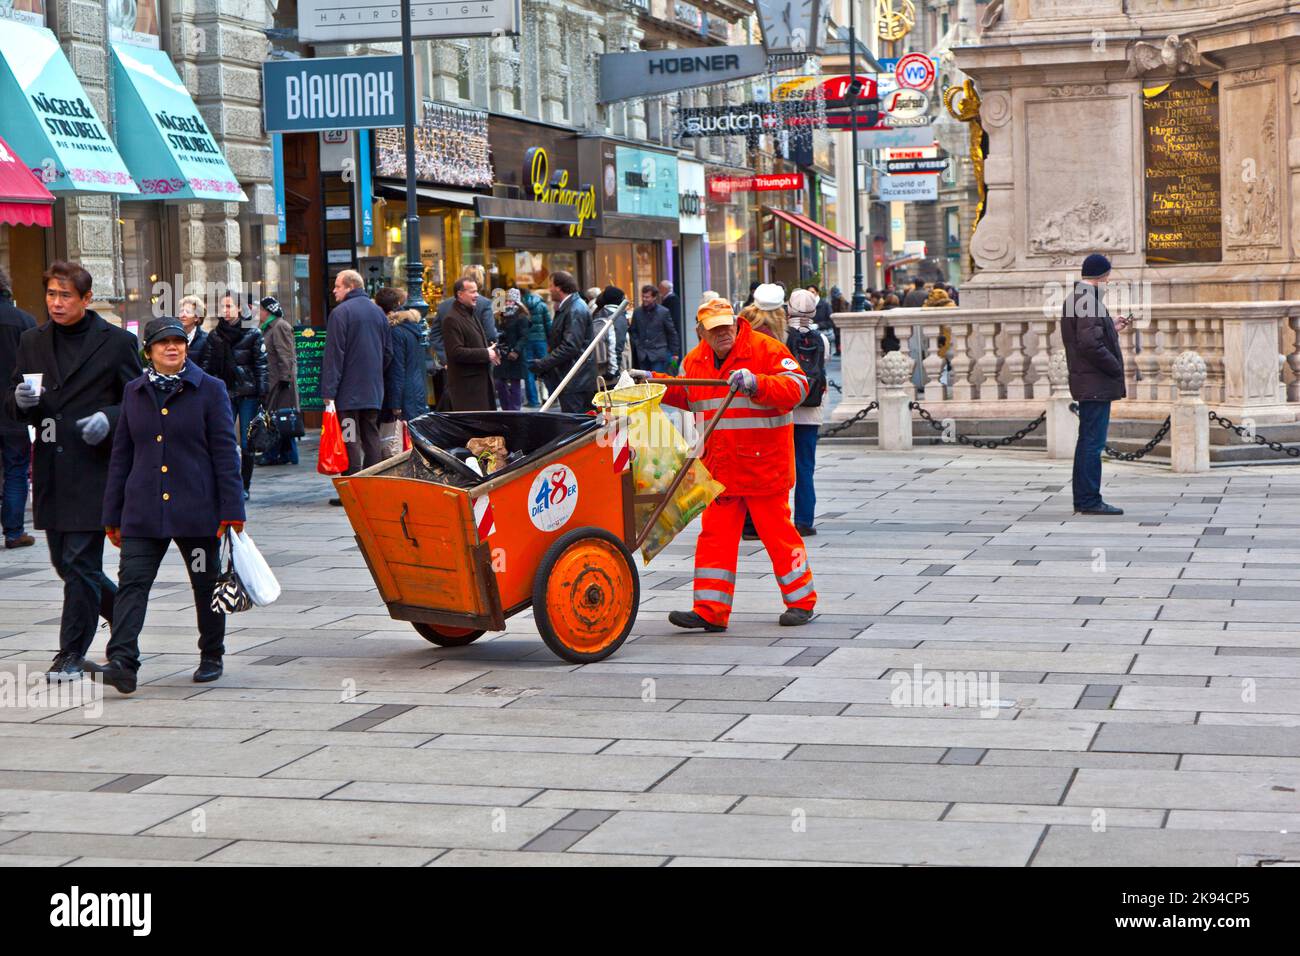 Vienna, Austria - November 27, 2010: man cleans the street at  Graben shopping area  in Vienna, Austria. The Graben traces its origin back to the old Stock Photo